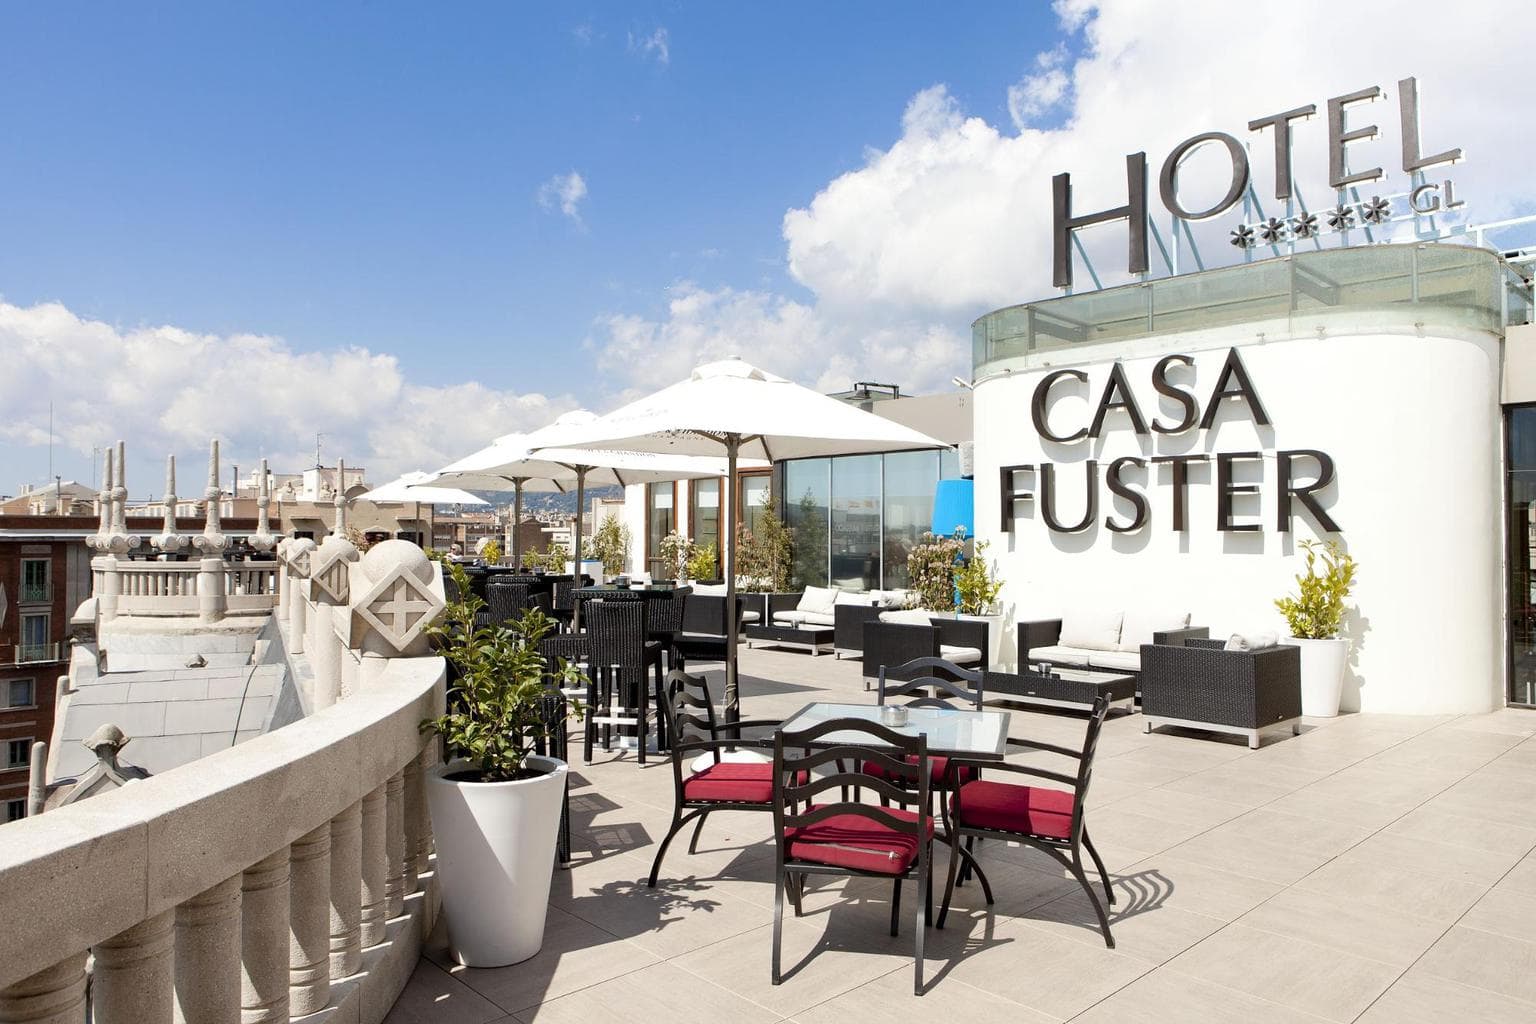 Casa Fuster rooftop terrace - Image courtesy of Casa Fuster